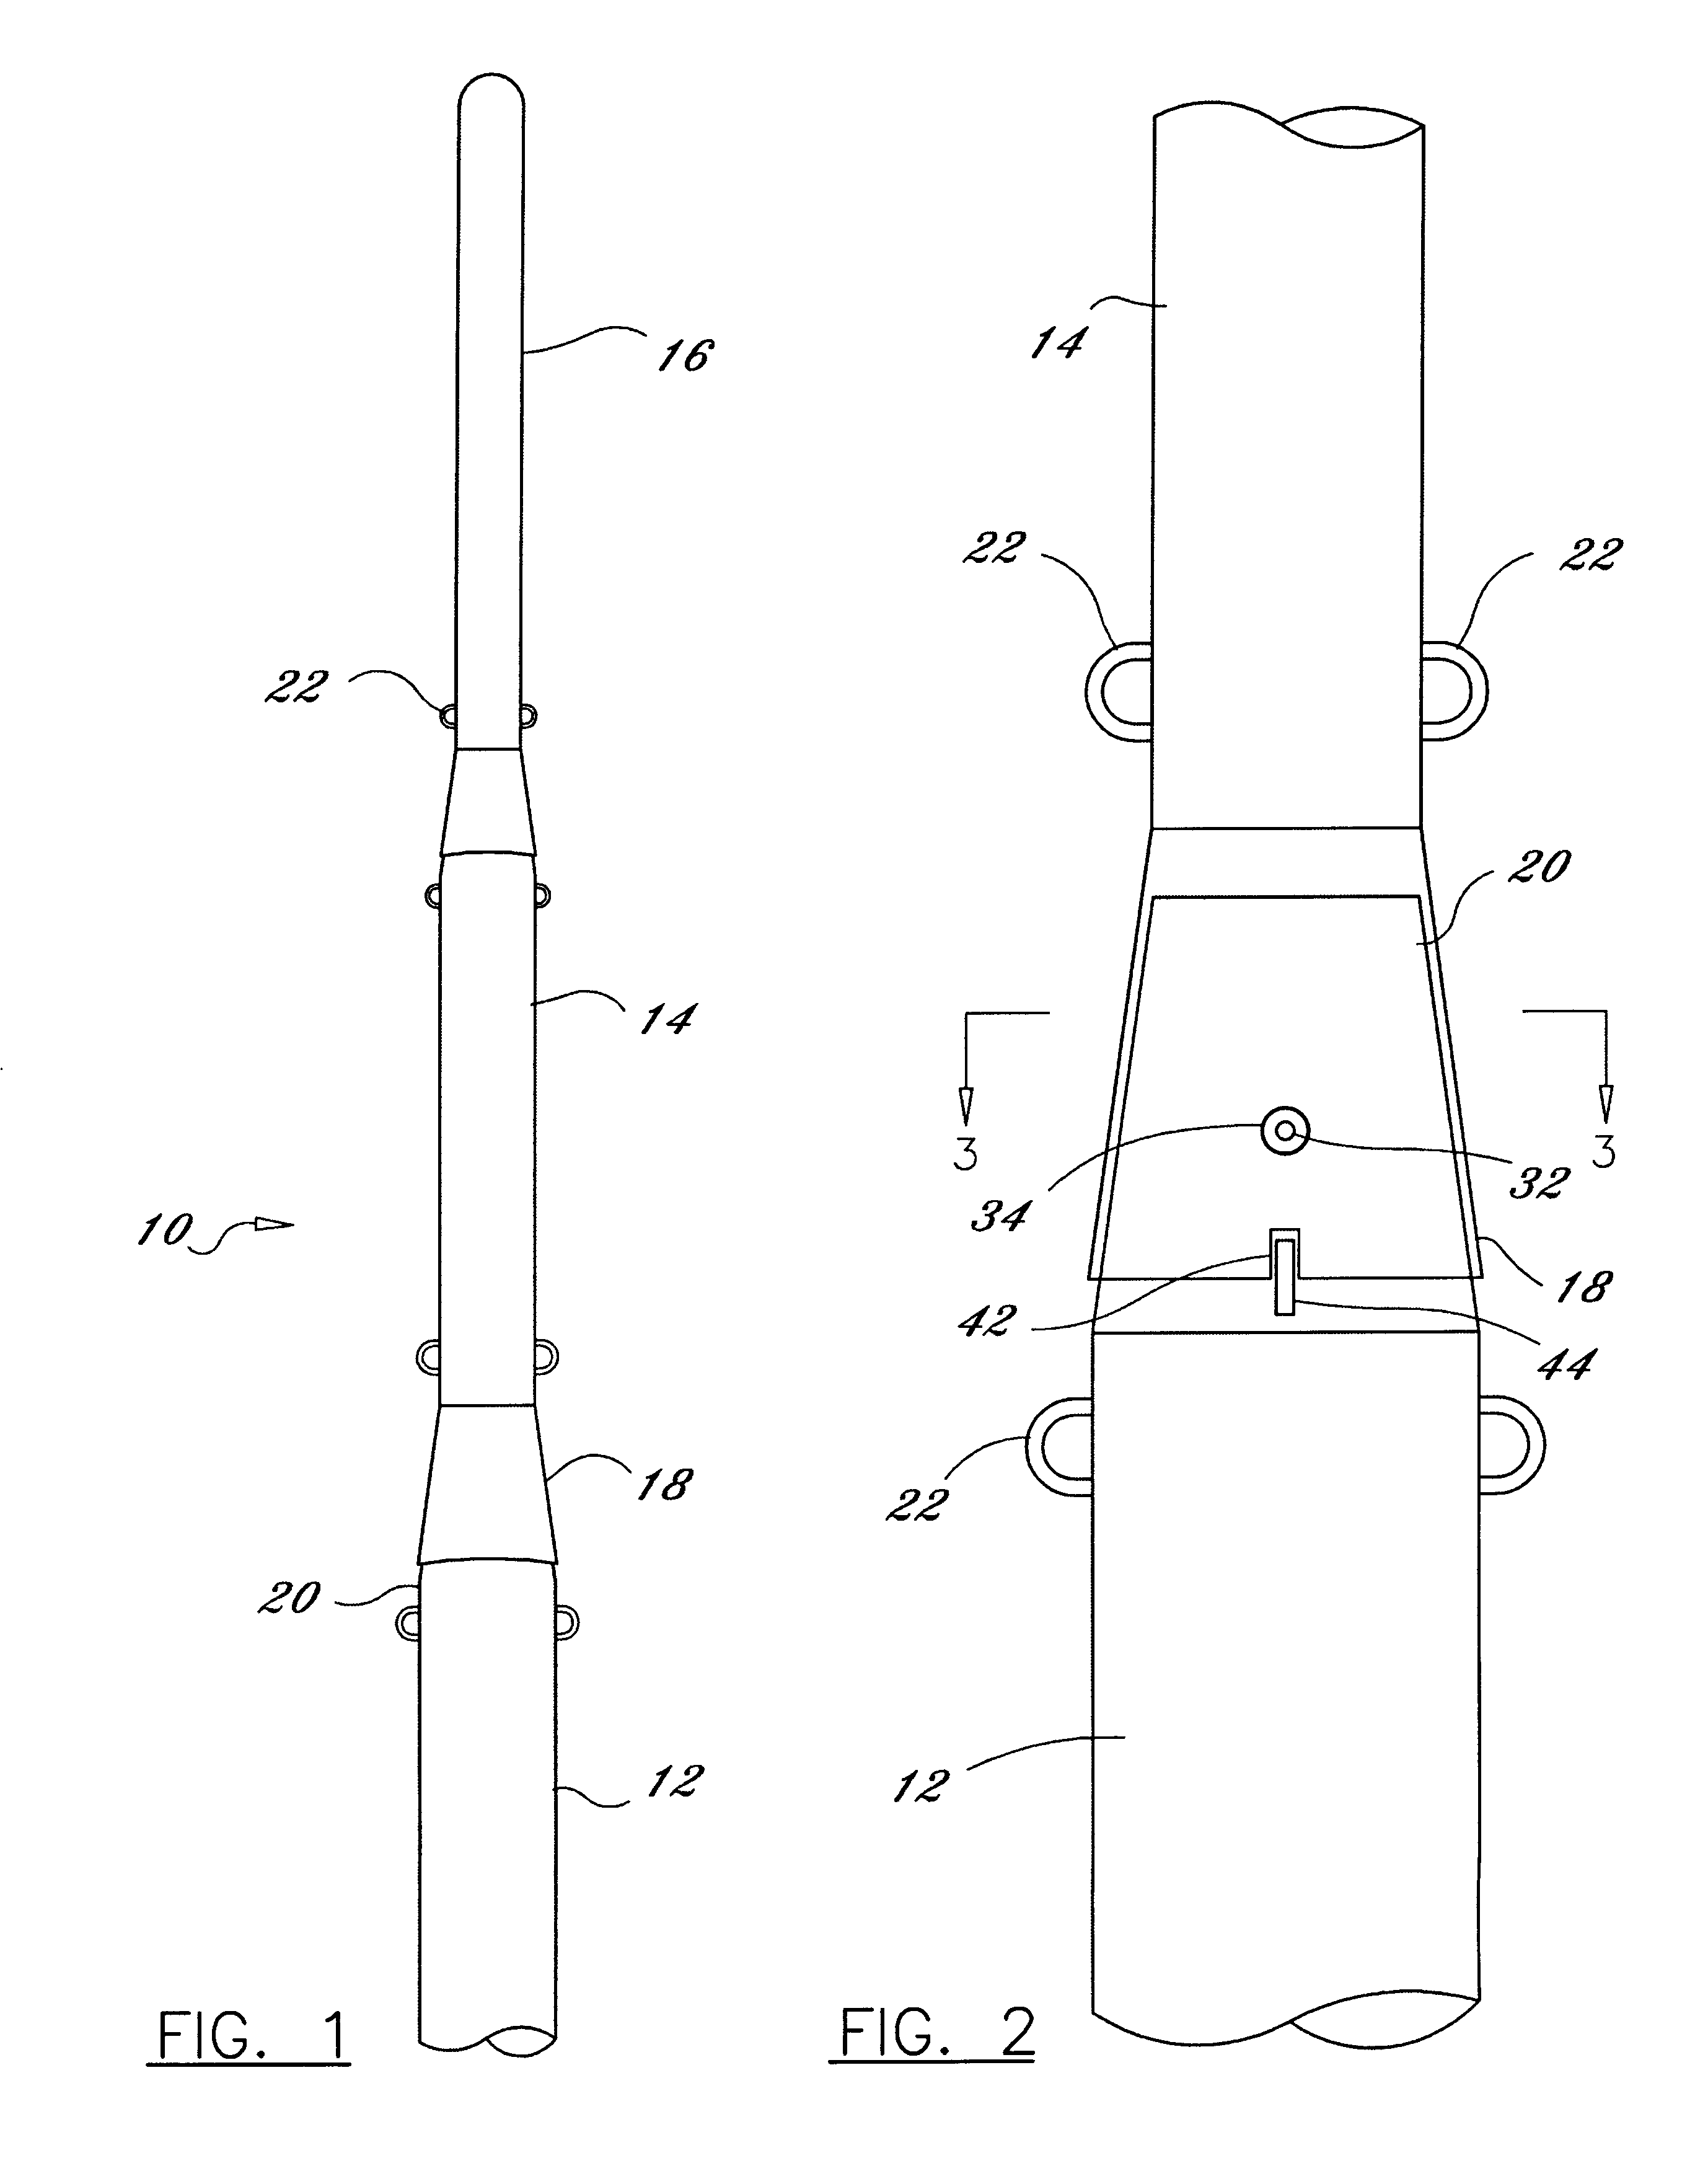 Multi-sectional utility pole having slip-joint conical connections